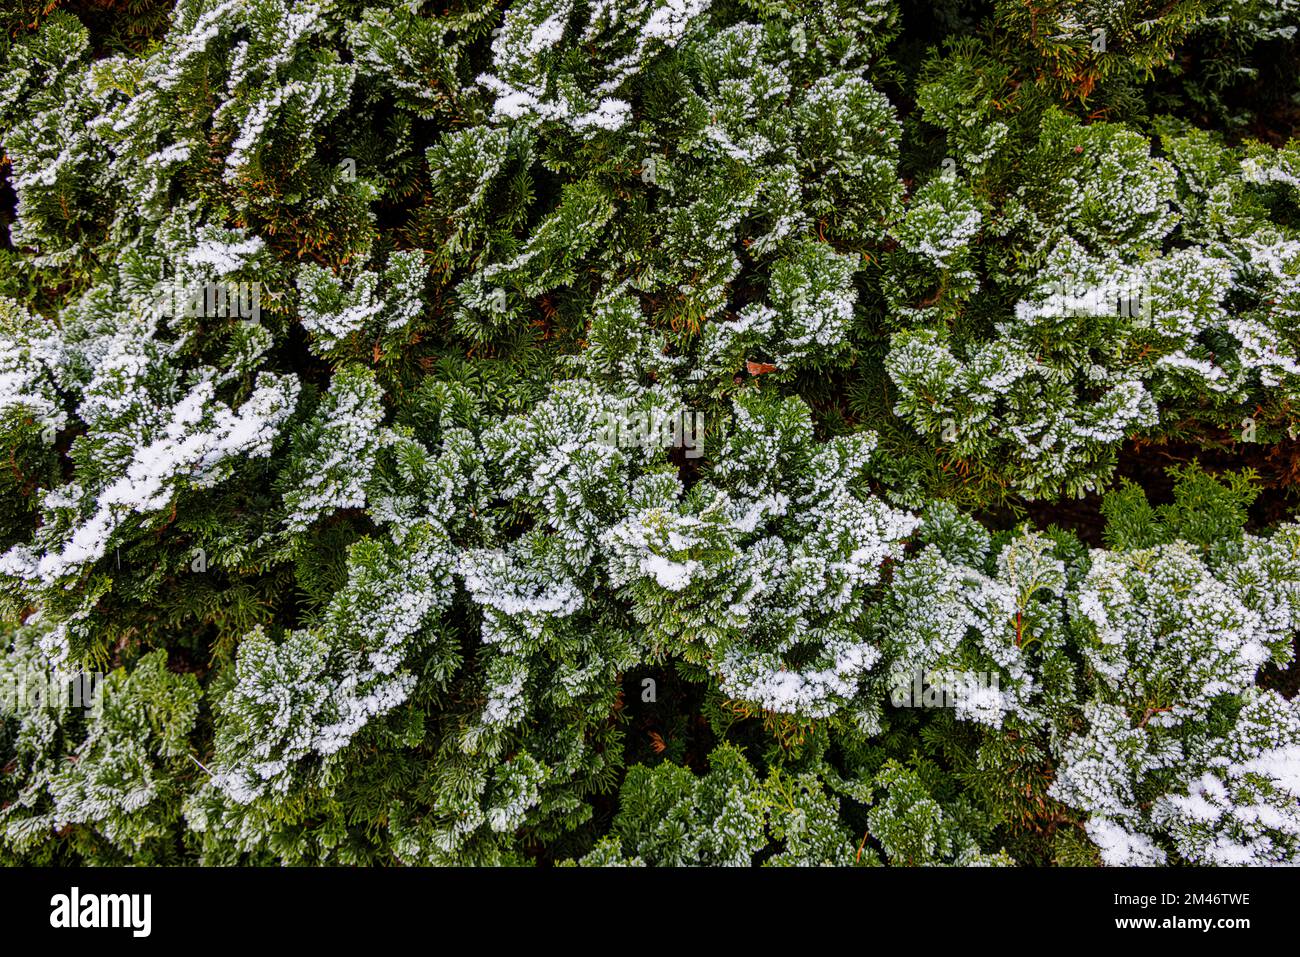 Frost and ice crystals on branches of an evergreen conifer tree  in a garden during very cold weather and low winter temperatures in Surrey, UK Stock Photo